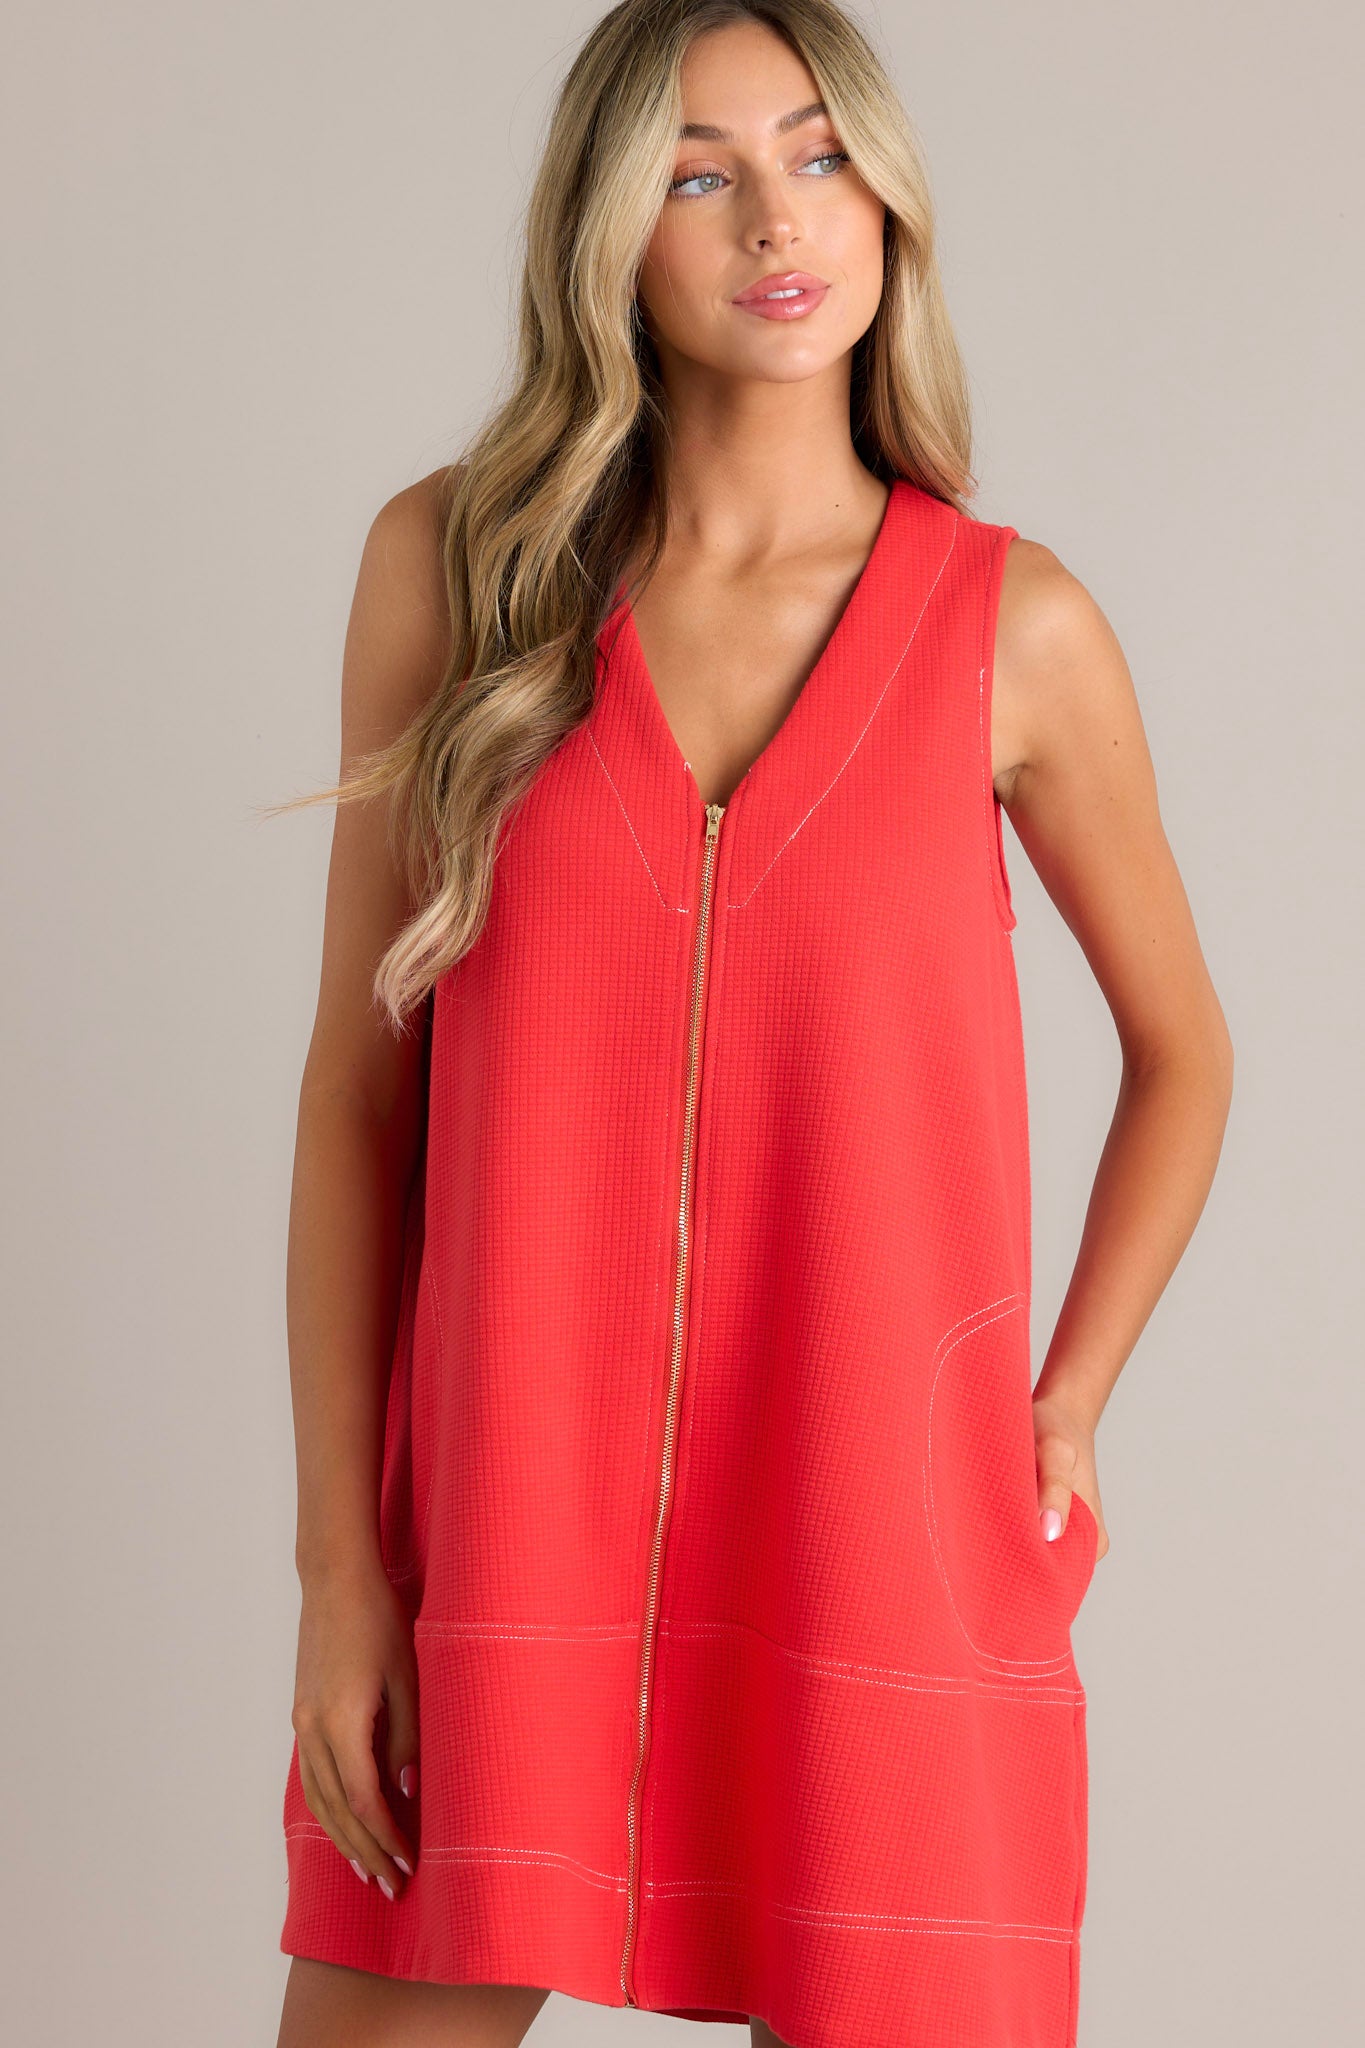 Close up view of this sleeveless, A-line coral dress with a front zipper detail and two large pockets, featuring a loose and casual fit.